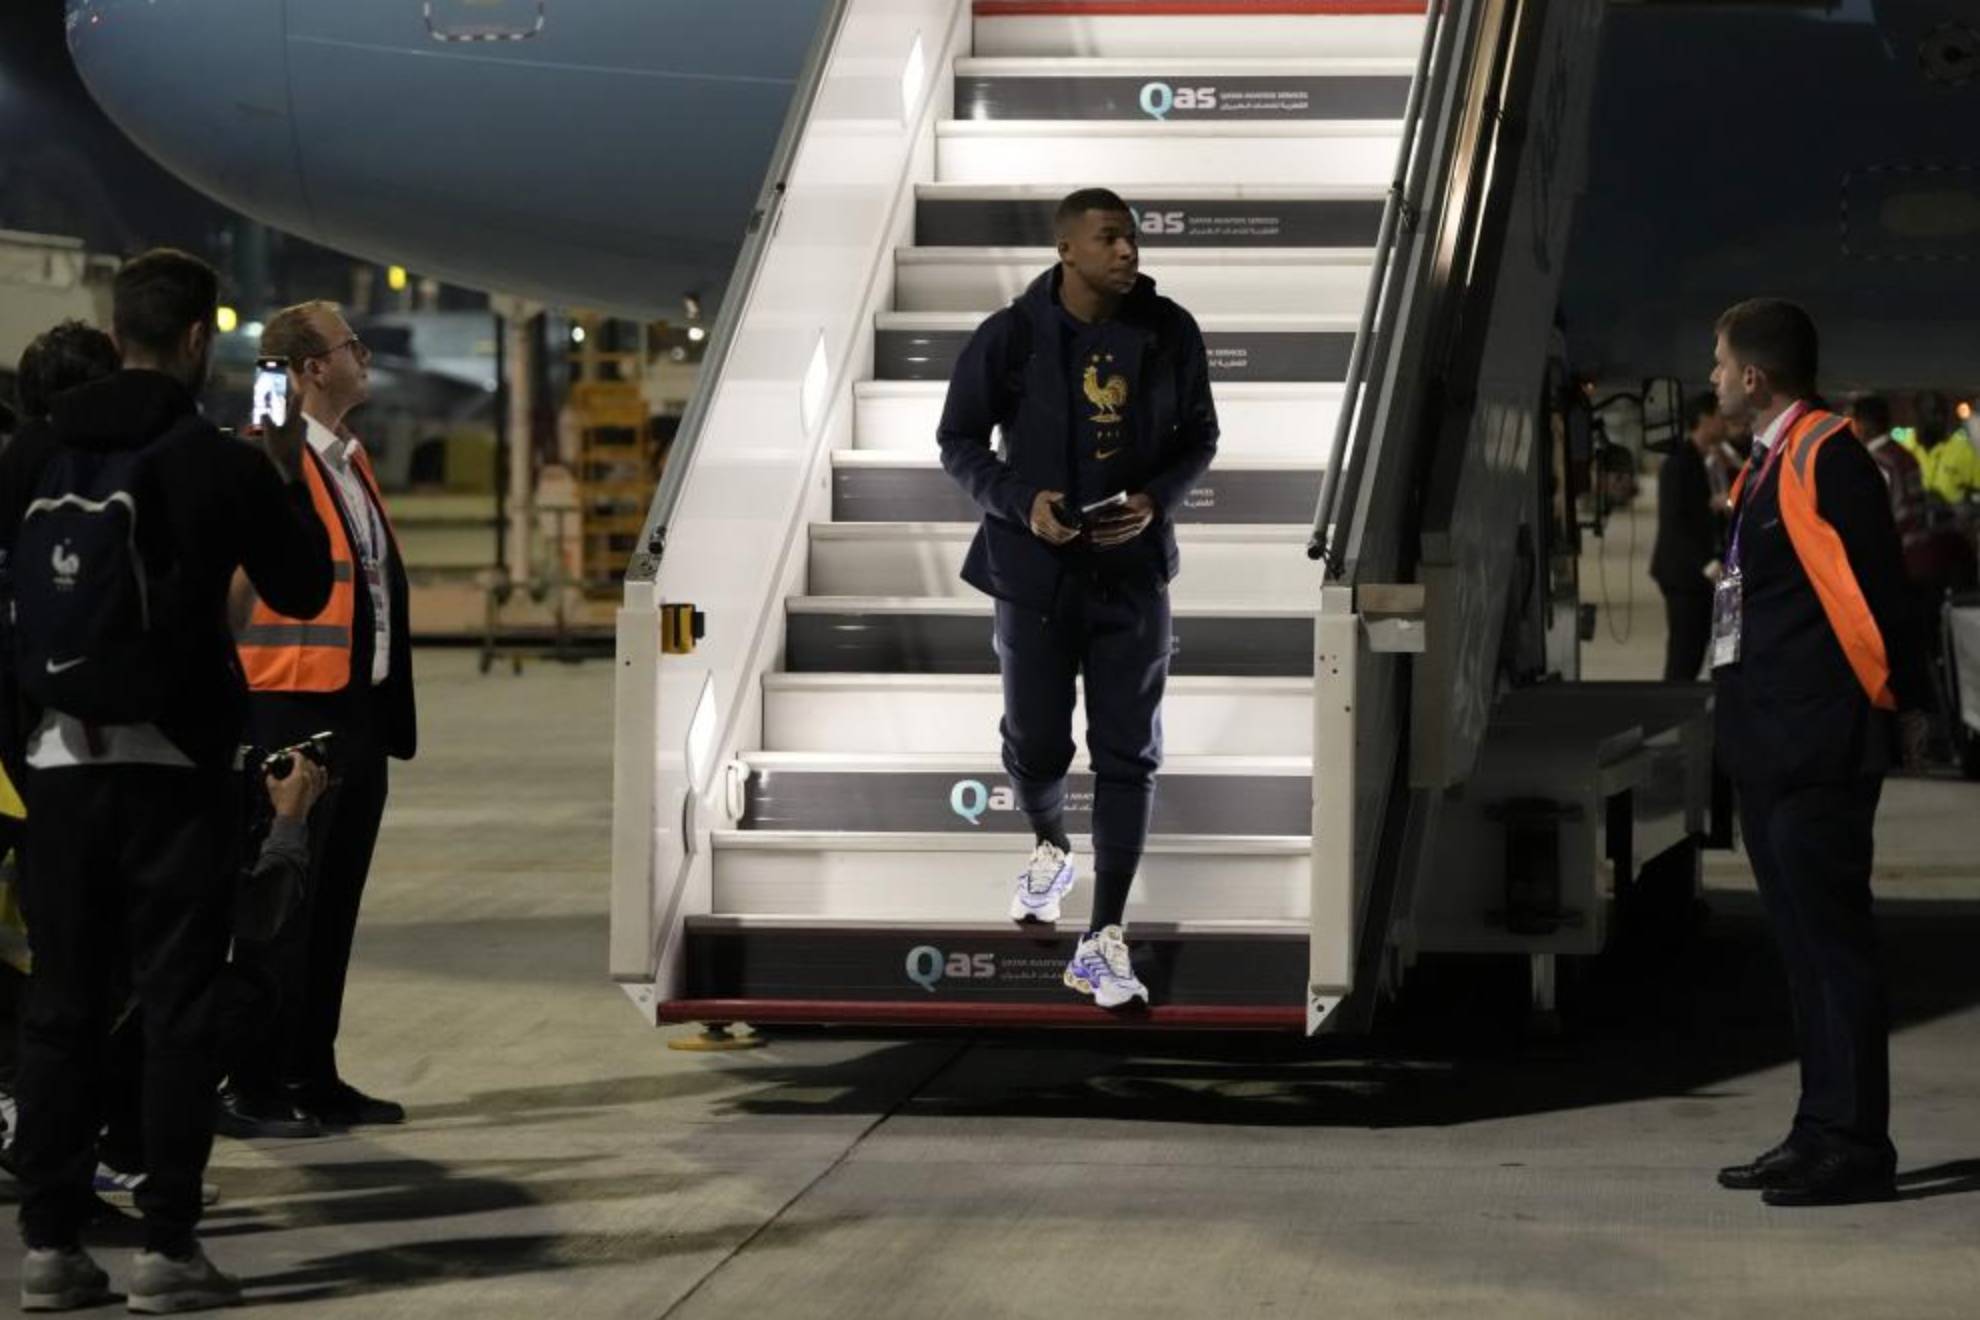 Mbappe lands in Qatar